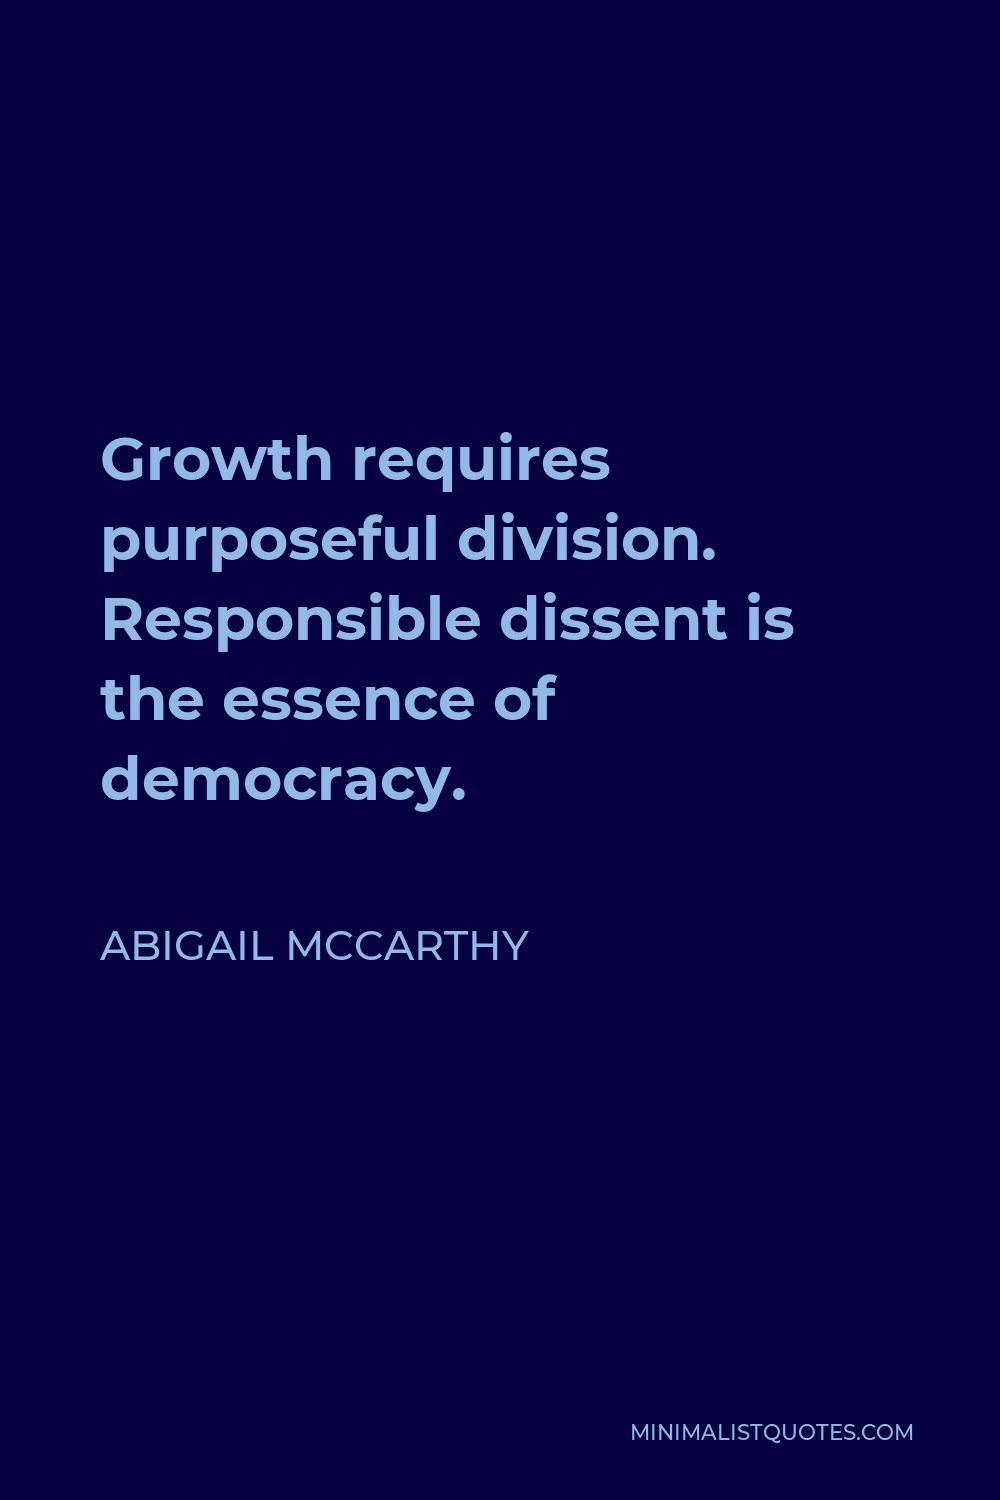 Abigail McCarthy Quote - Growth requires purposeful division. Responsible dissent is the essence of democracy.